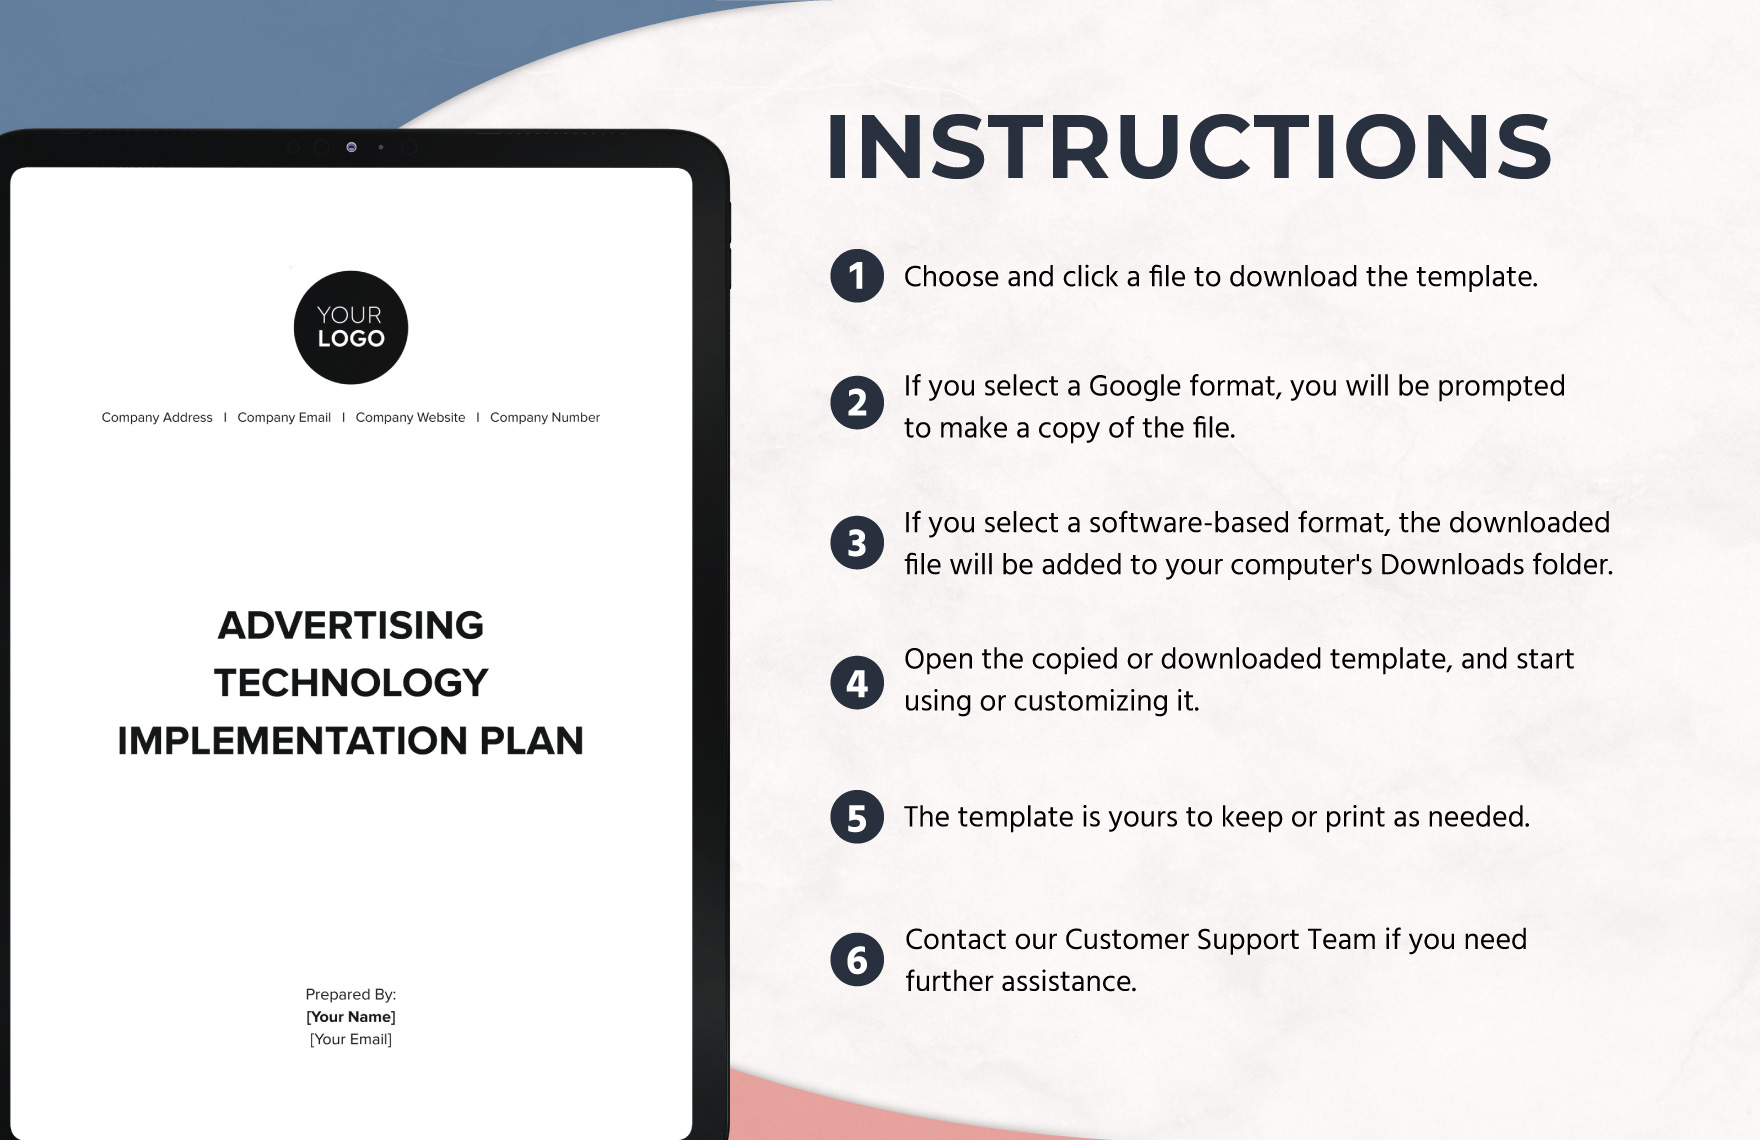 Advertising Technology Implementation Plan Template